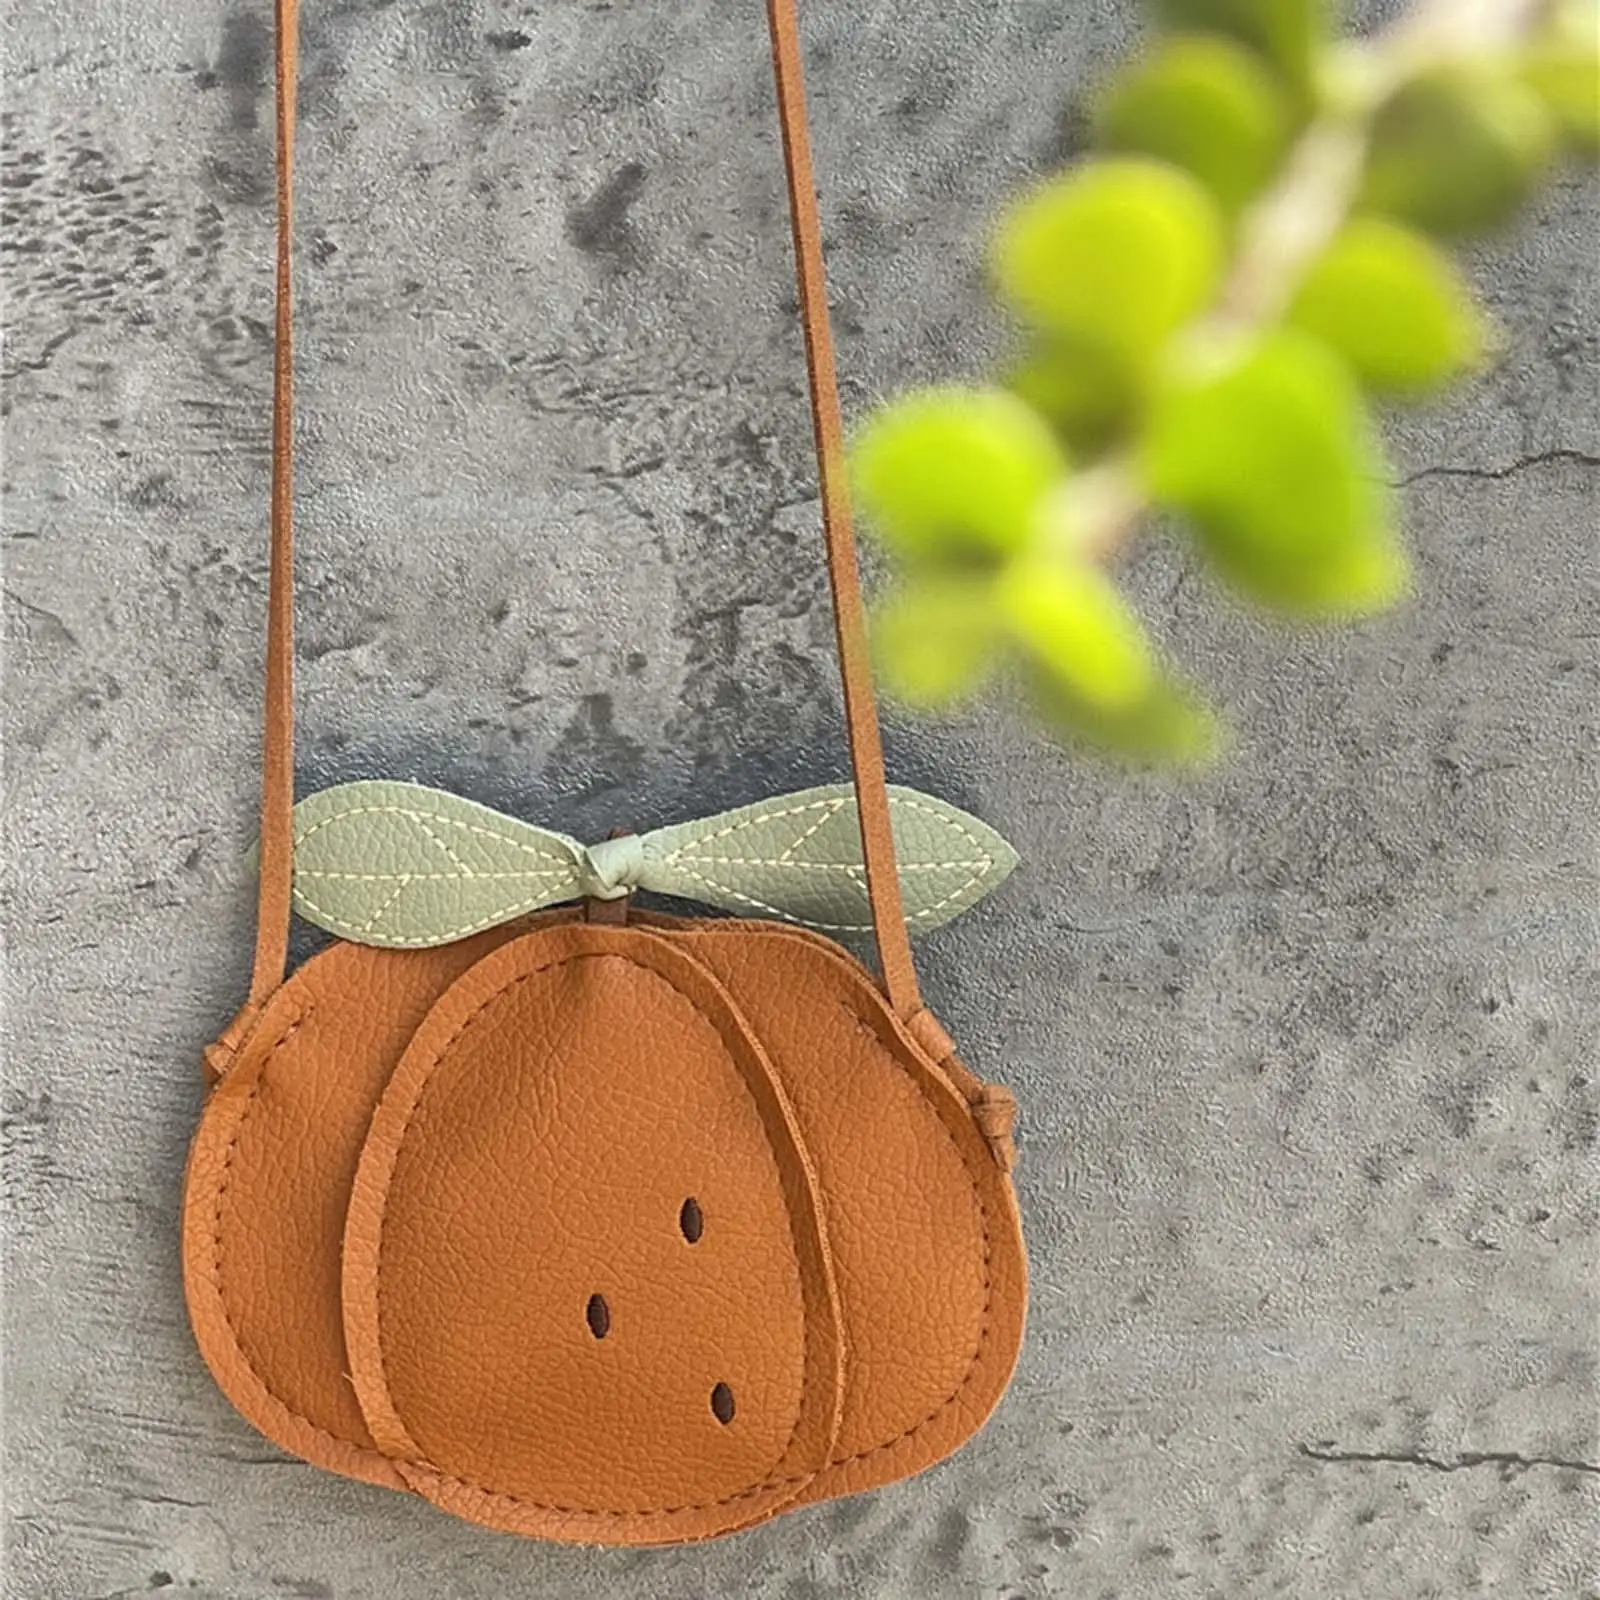 Cute Small Shoulder Bag Coin Purse Mini PU Leather Handbags Gifts for Kids Shoulder Bag Messenger Crossbody Bags for Girls Purse